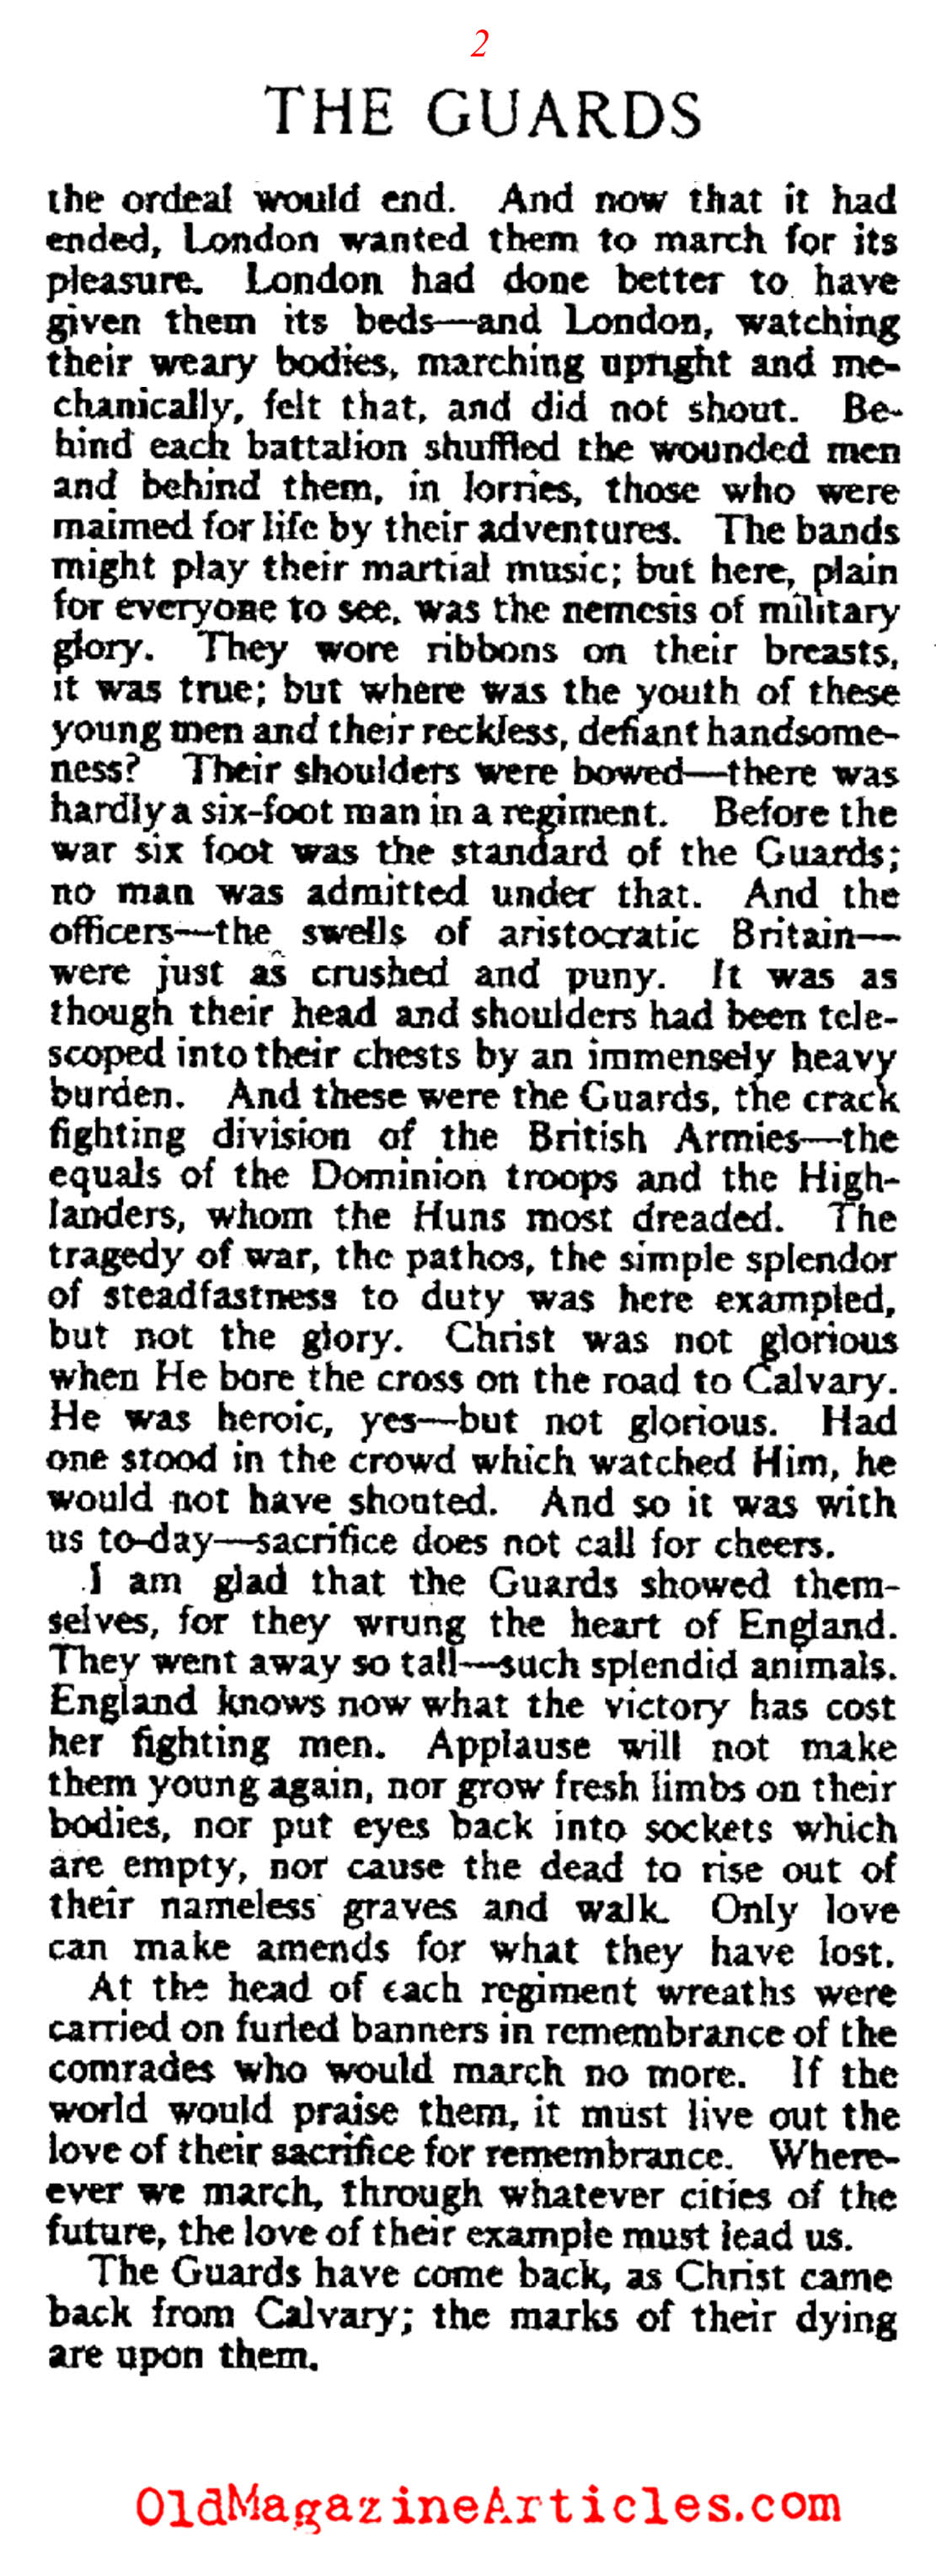 The Return of the Coldstream Guards  (The New Red Cross Magazine, 1919)